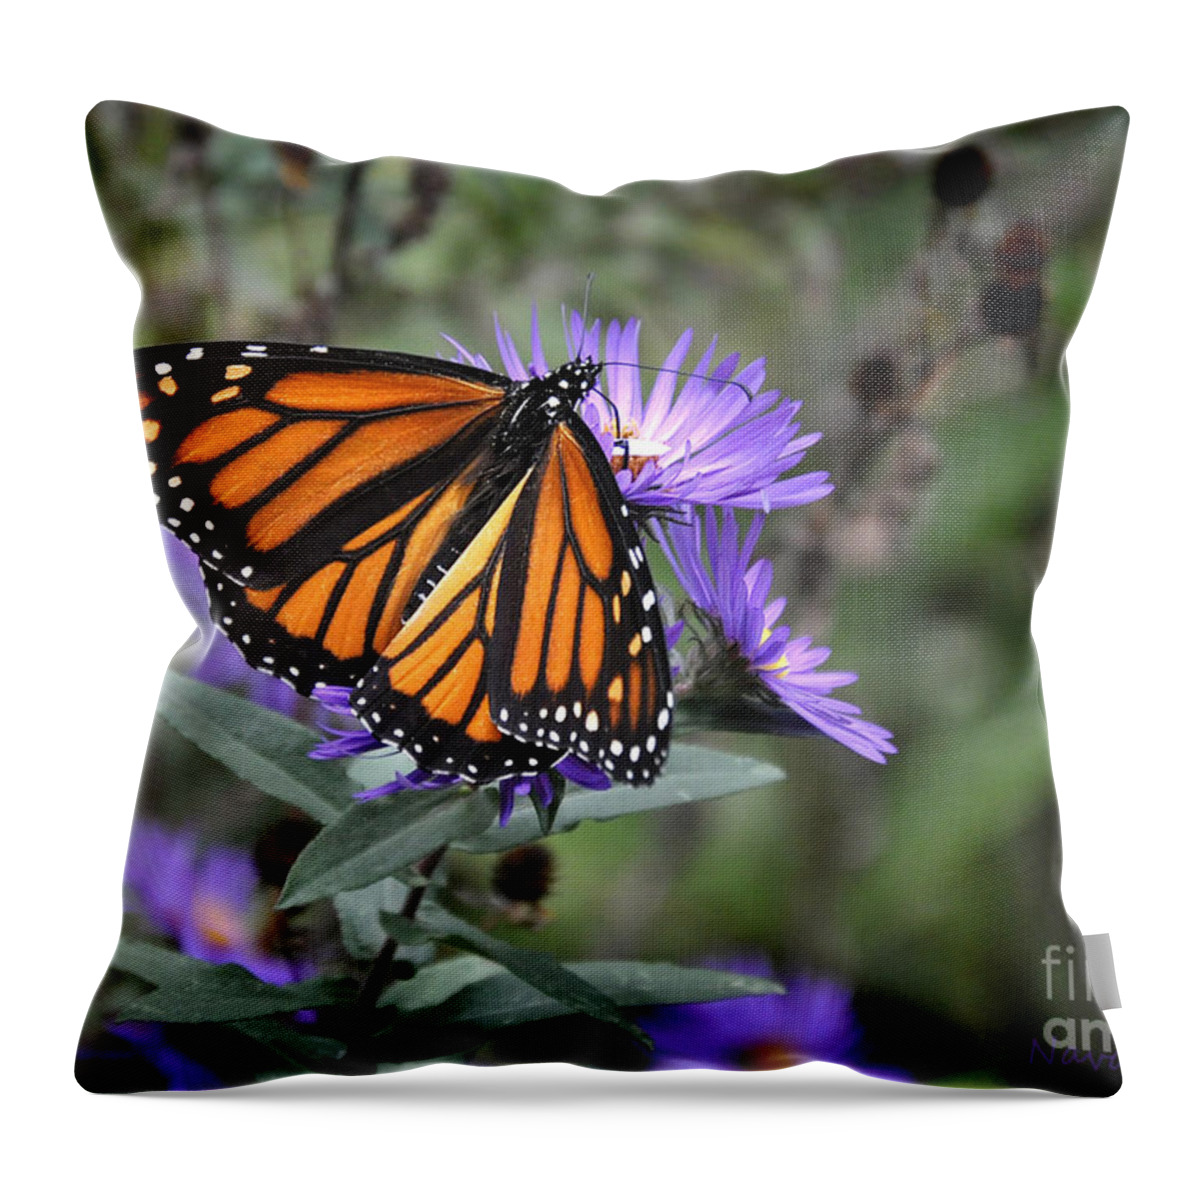 Nature Throw Pillow featuring the photograph Glowing Butterfly by Nava Thompson